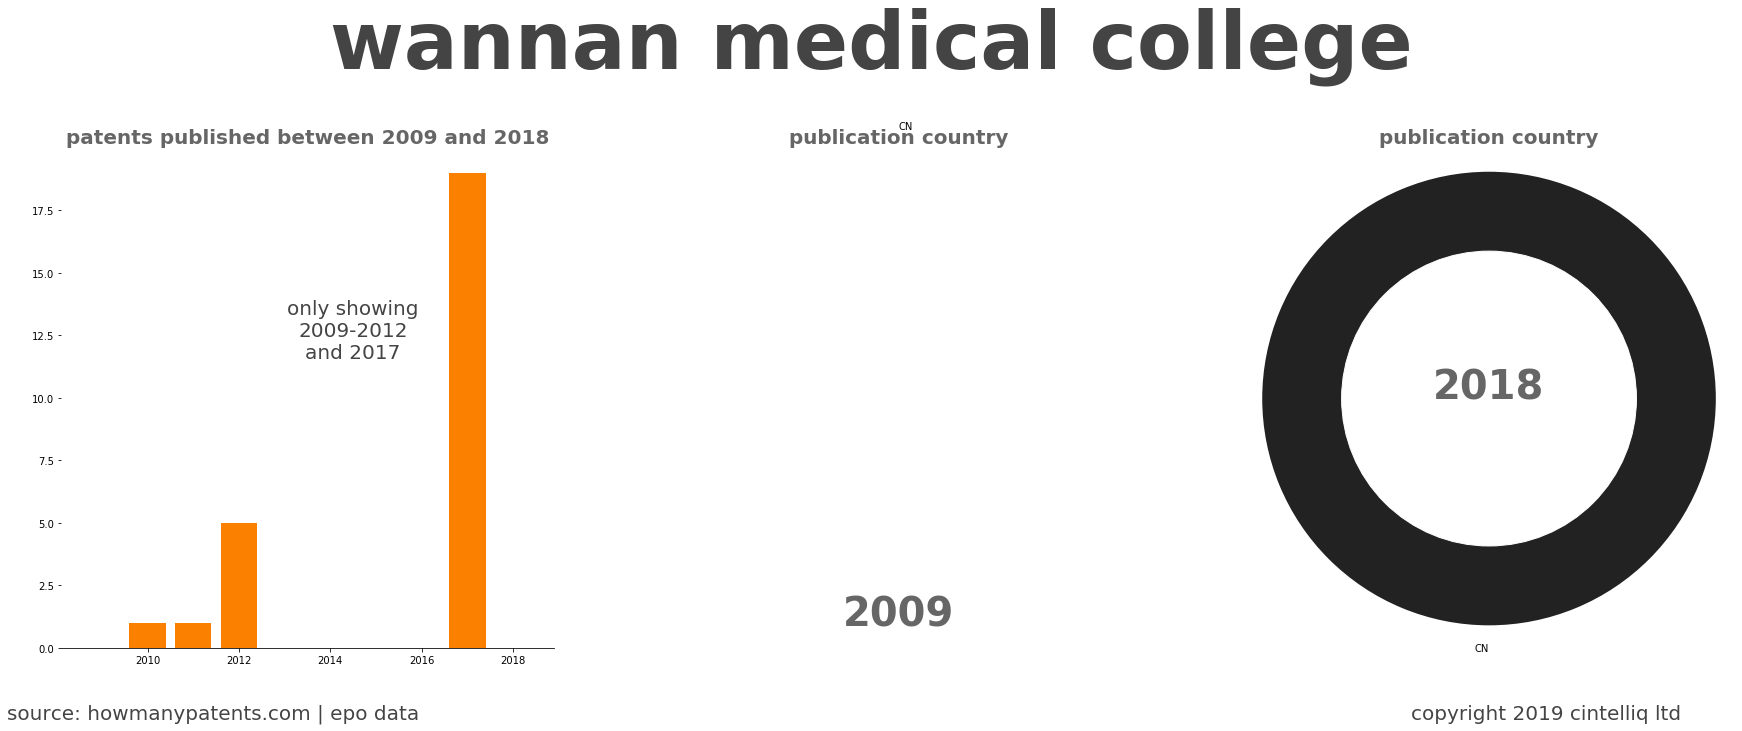 summary of patents for Wannan Medical College